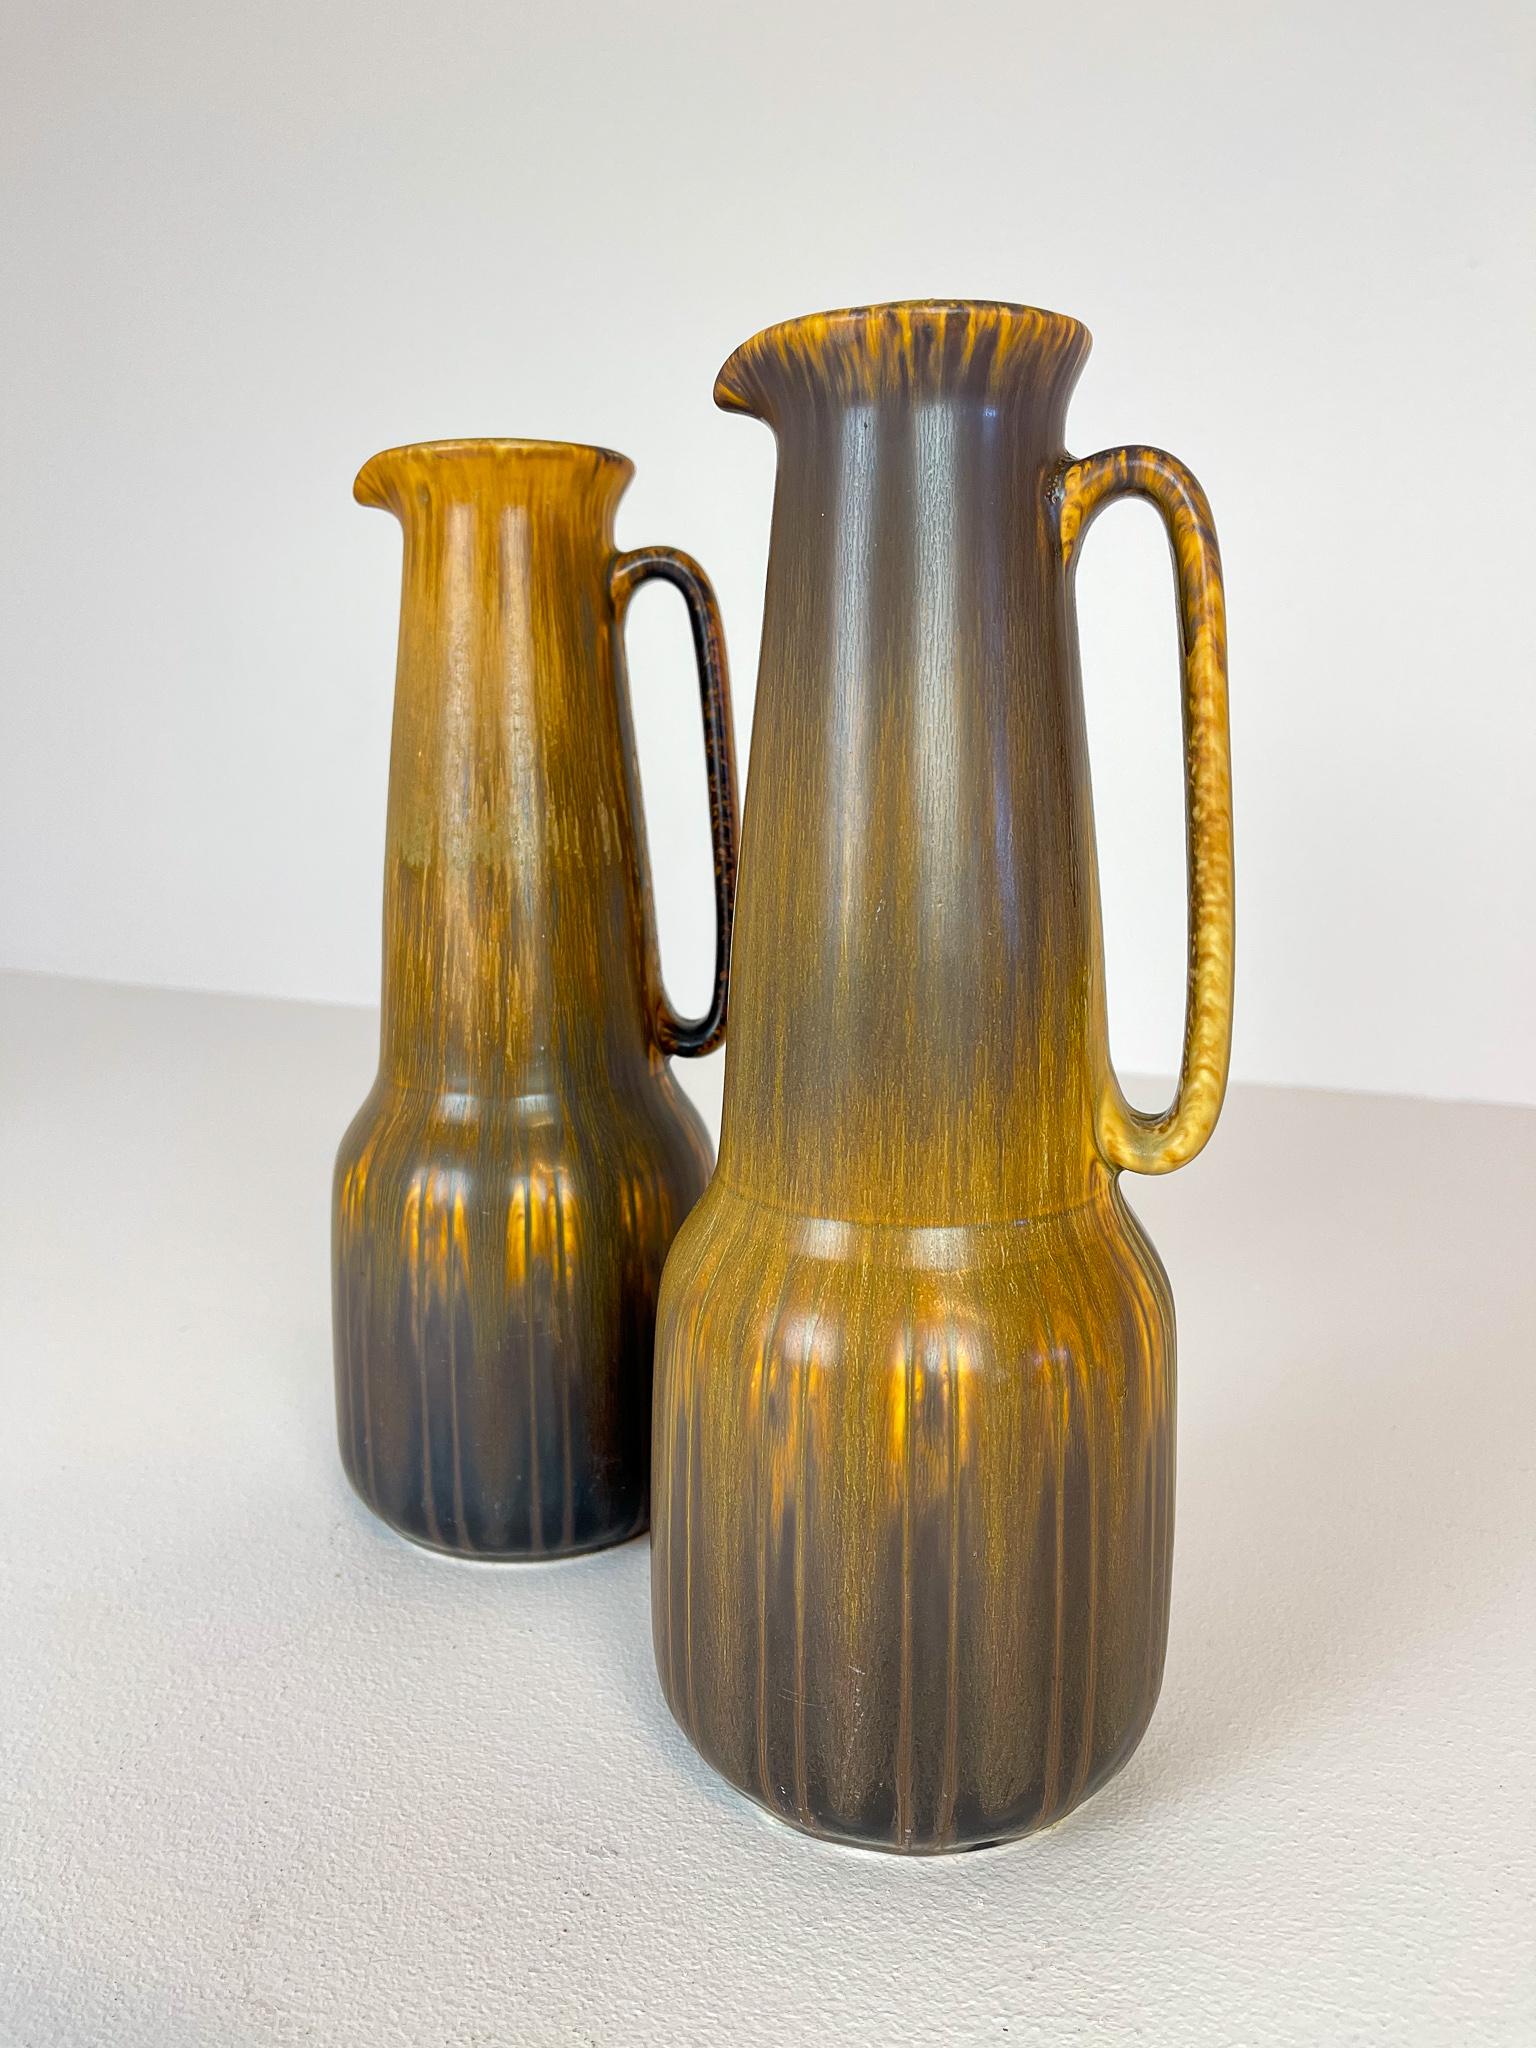 These two wonderful vases were created and designed by Gunnar Nylund at the Rörstrand Factory in the 1950s, Sweden. These vases are not so often seen as a pair, and with its wonderful glaze they are a nice piece to put in many homes.

Good